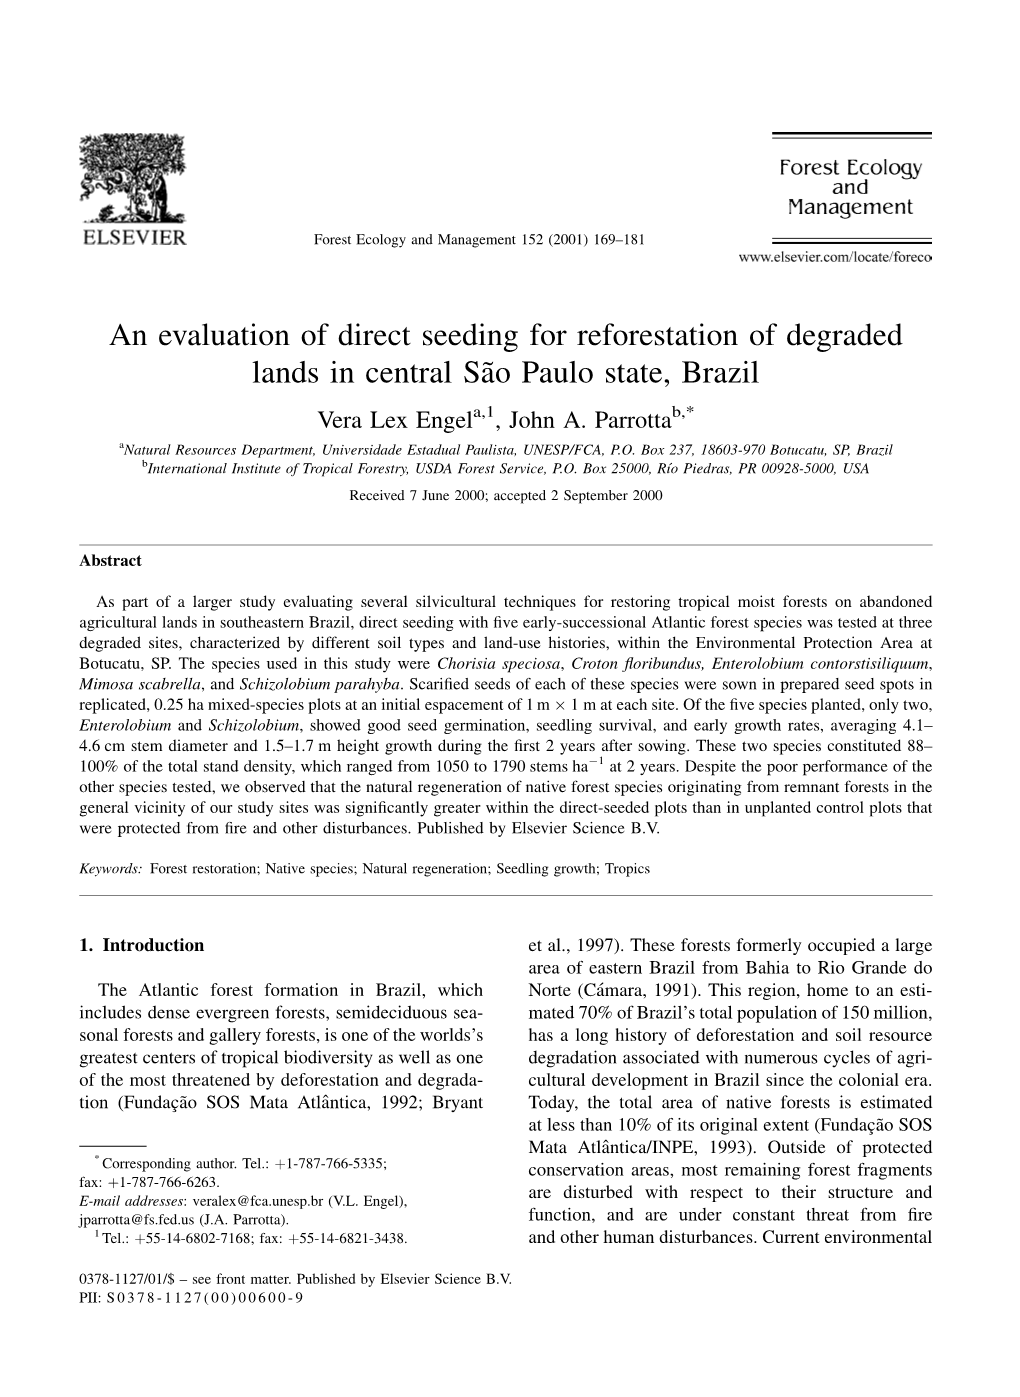 An Evaluation of Direct Seeding for Reforestation of Degraded Lands in Central Saƒo Paulo State, Brazil